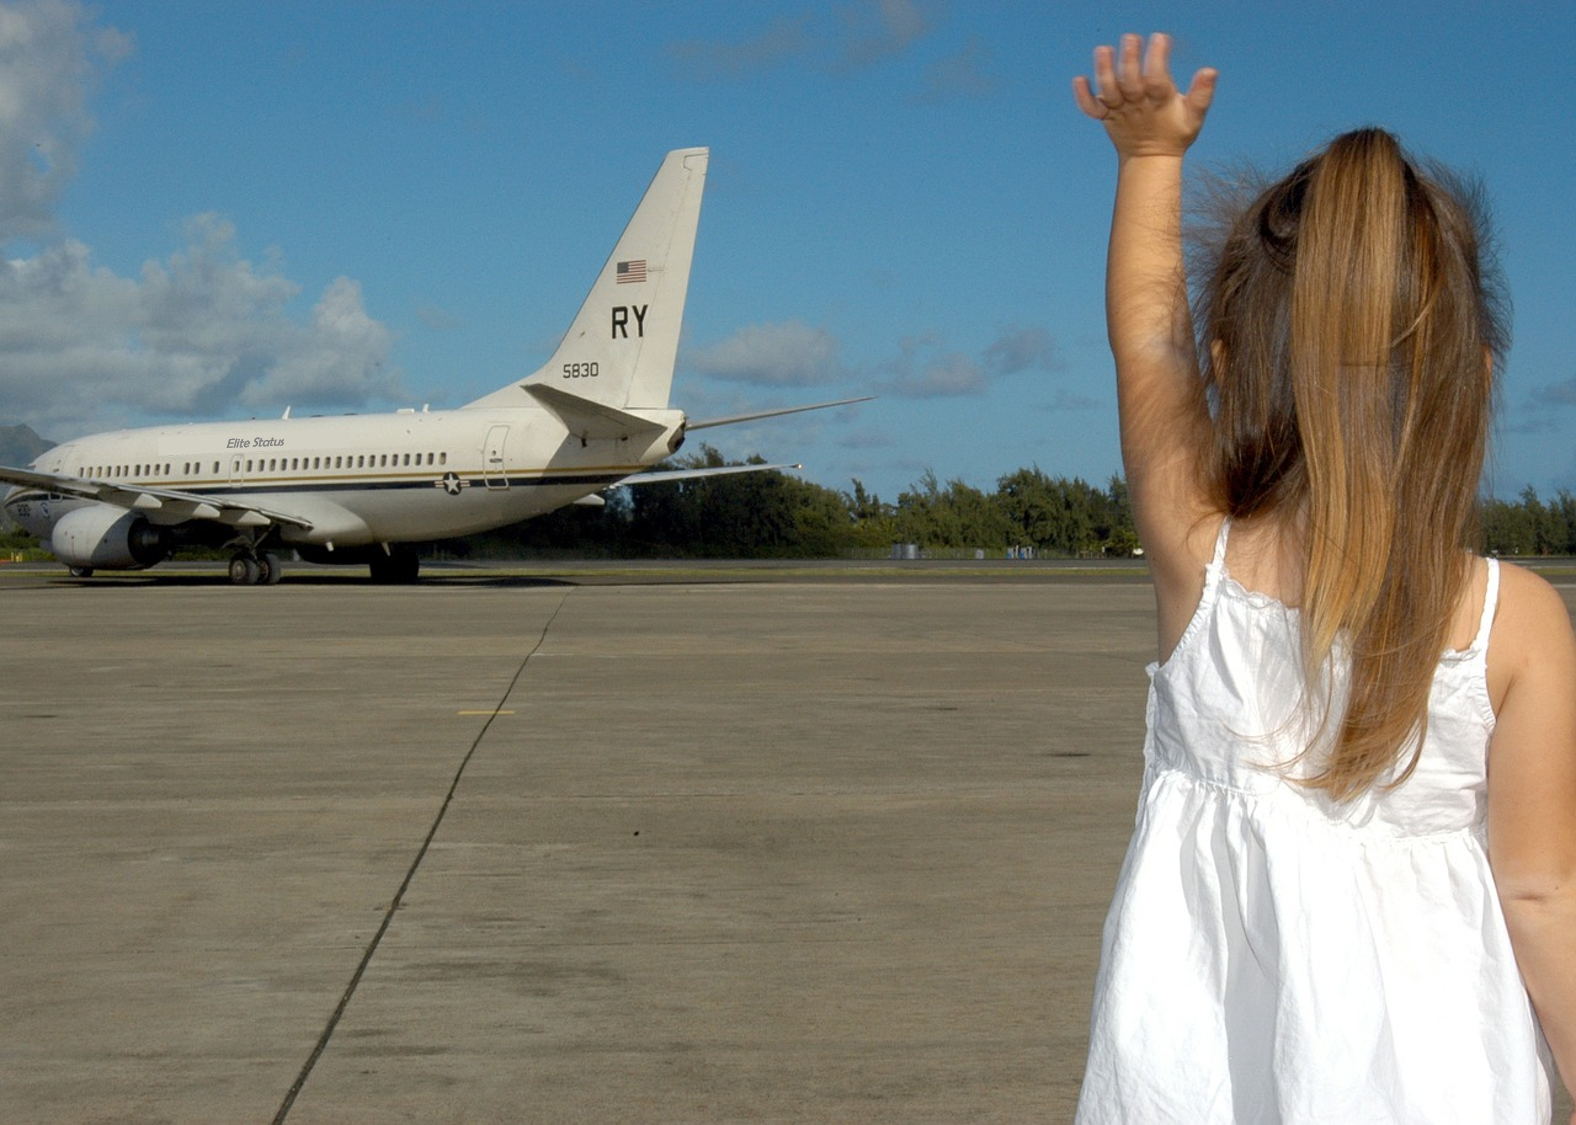 a girl raising her hand in front of an airplane